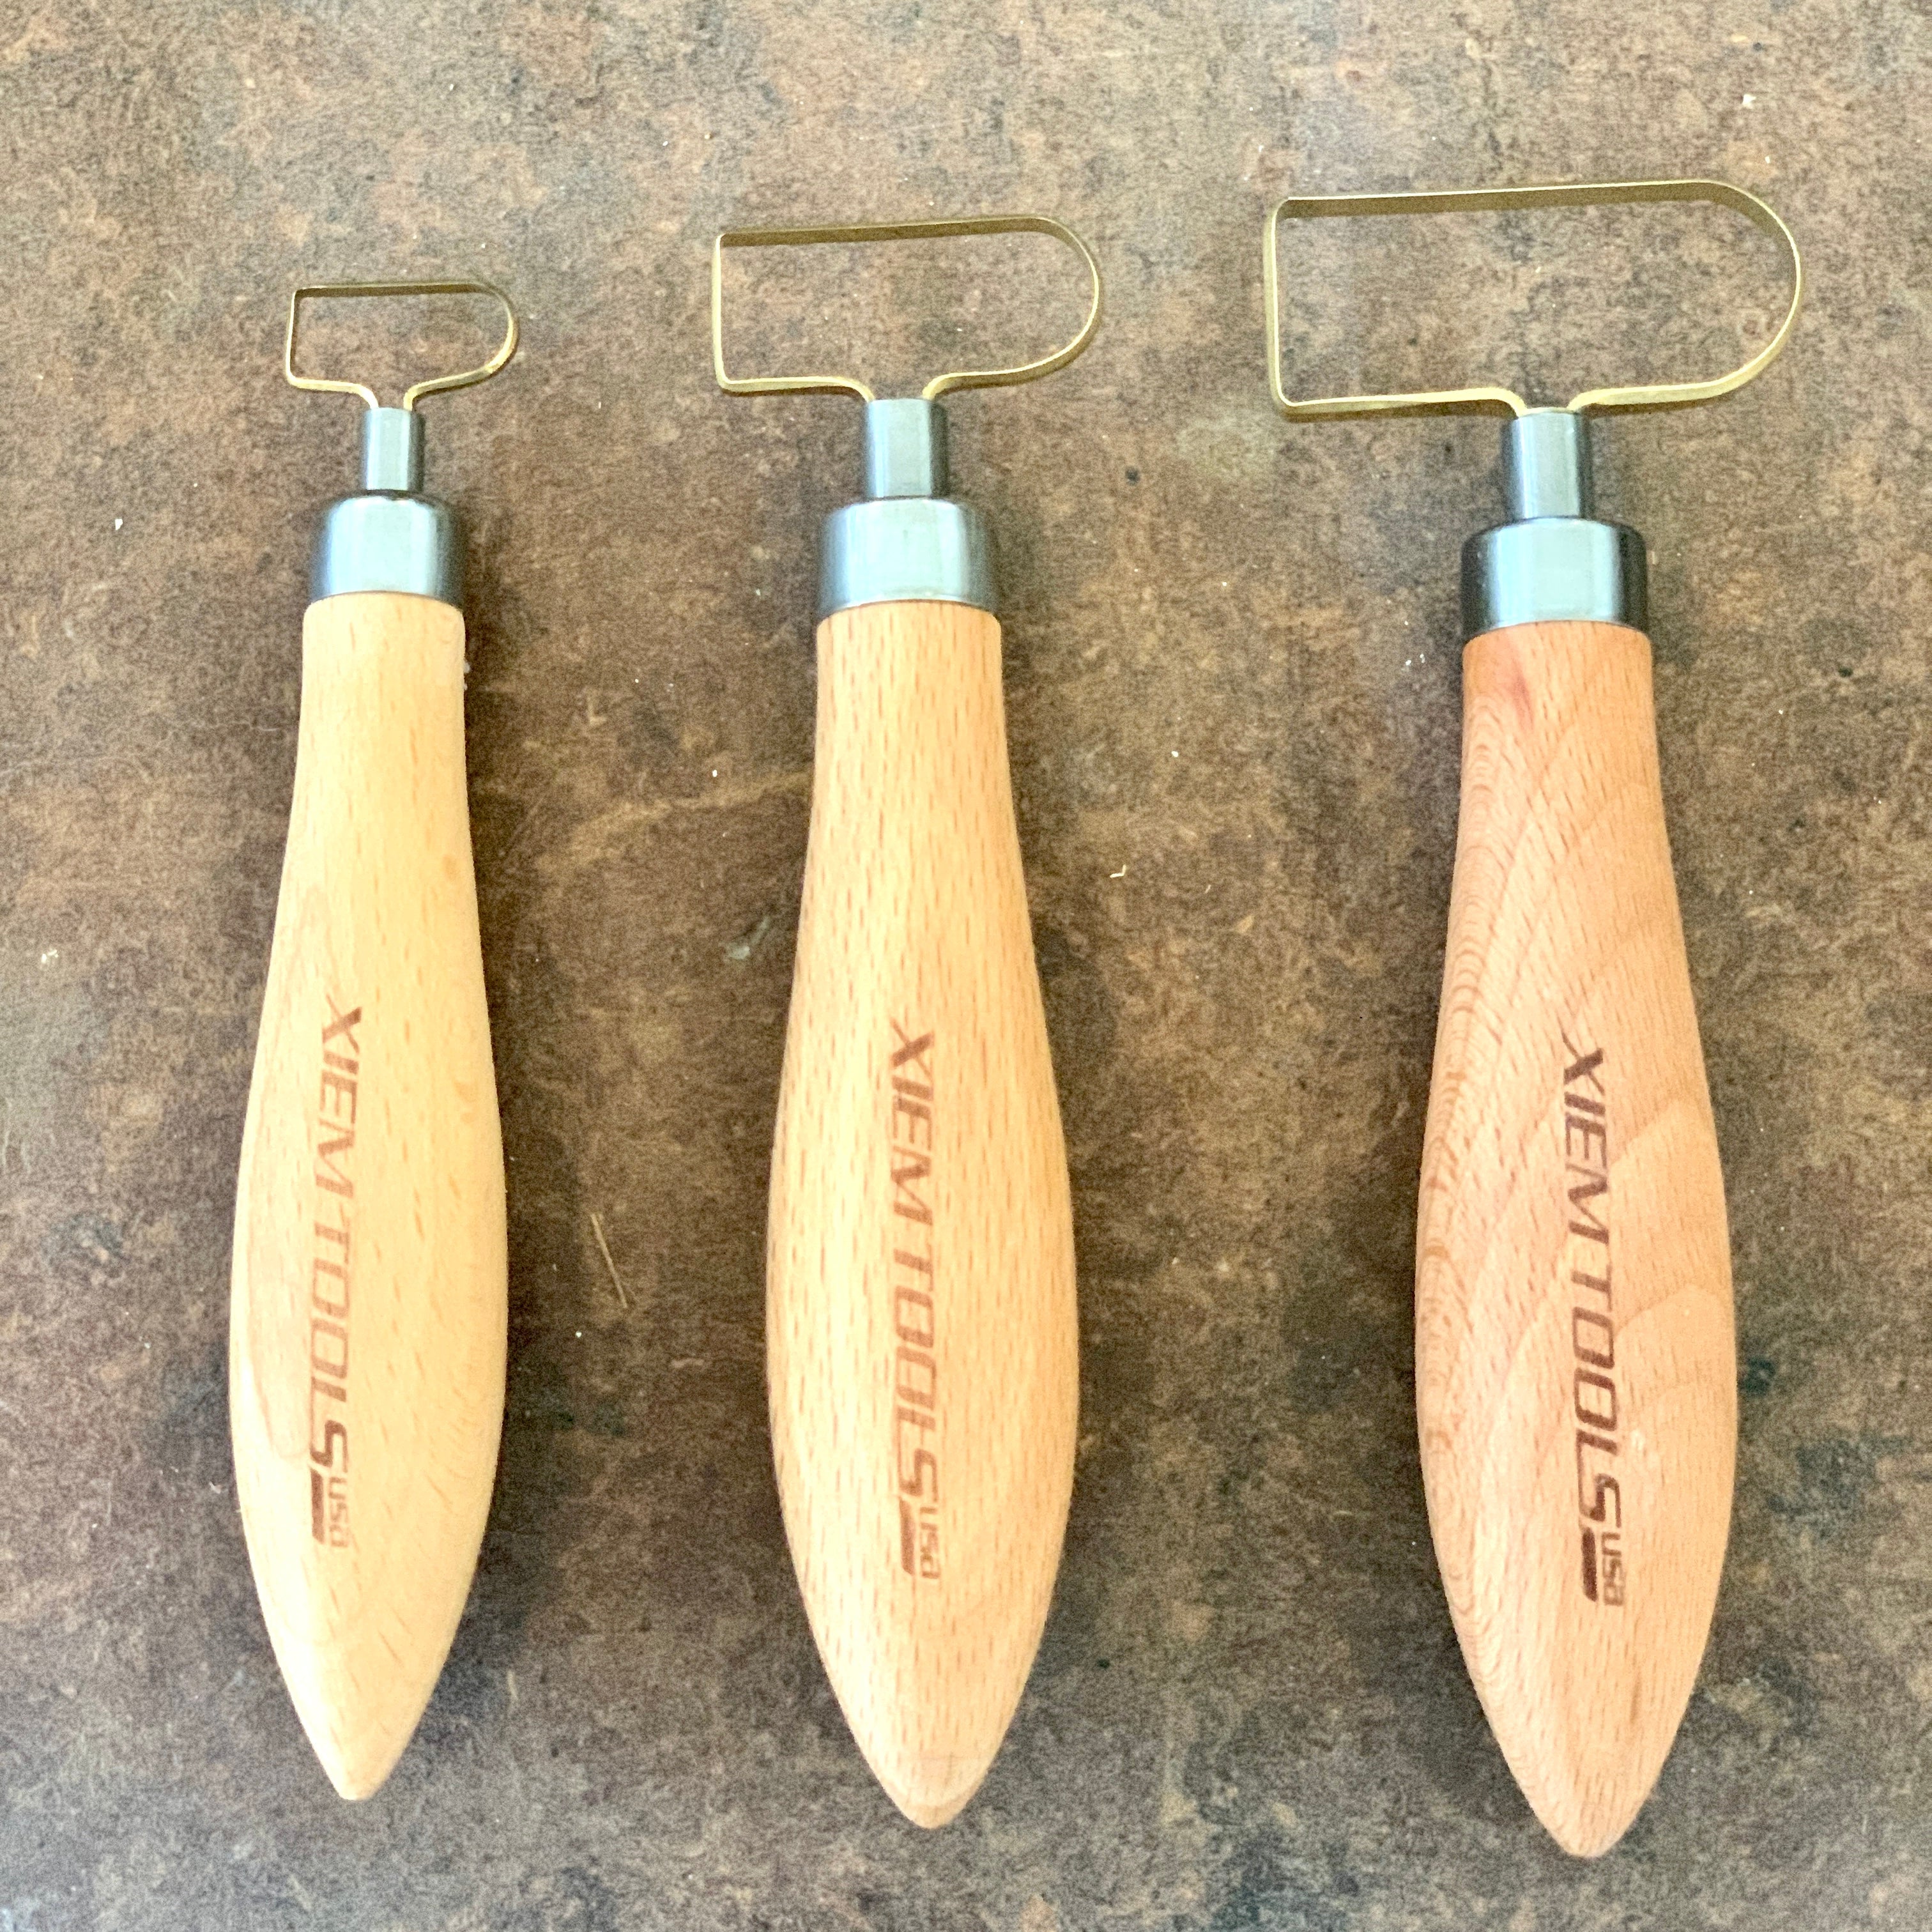 Rovin Ceramics - Some of our favorite Xiem tools! These hand-forged  stainless steel tools are great for trimming, scoring, marking, and more!  #xiem #usa #ceramics #tools #pottery #claytools #pots #ceramicart #art  #steel #